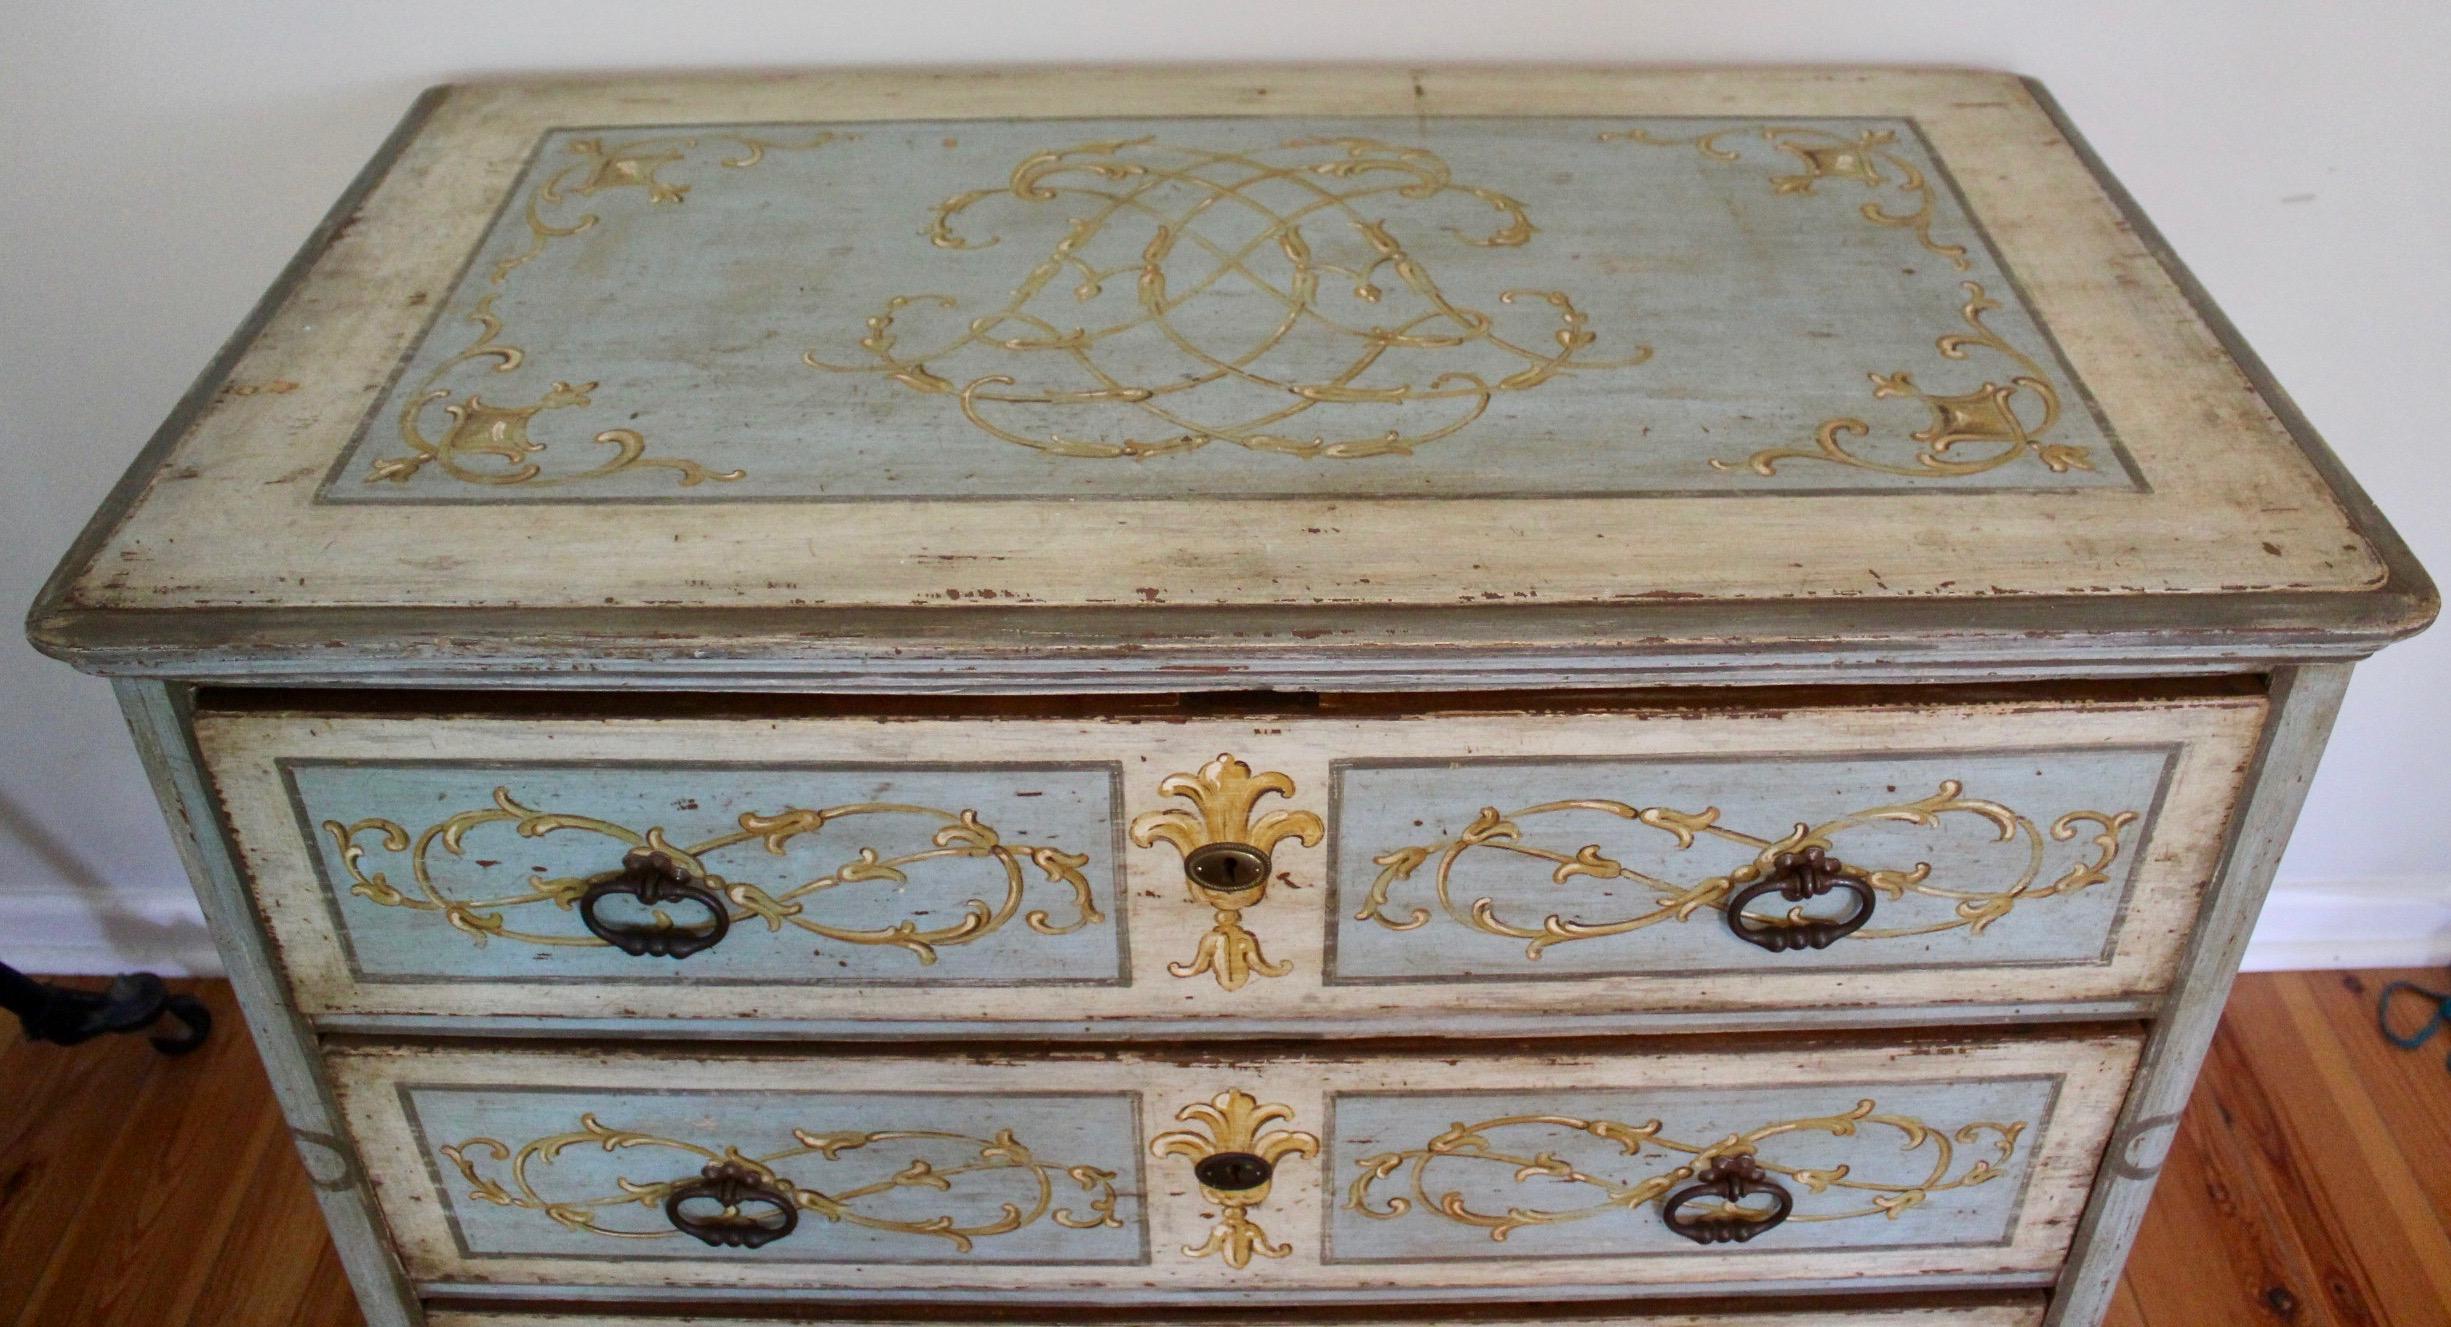 Beautiful hand painted pine 19th century Italian commode in a robins egg blue with yellow, grey and cream decoration. Drawers are joined with handcut dove tails and the piece as a whole is handmade and with wonderful joinery. Hand painted with a